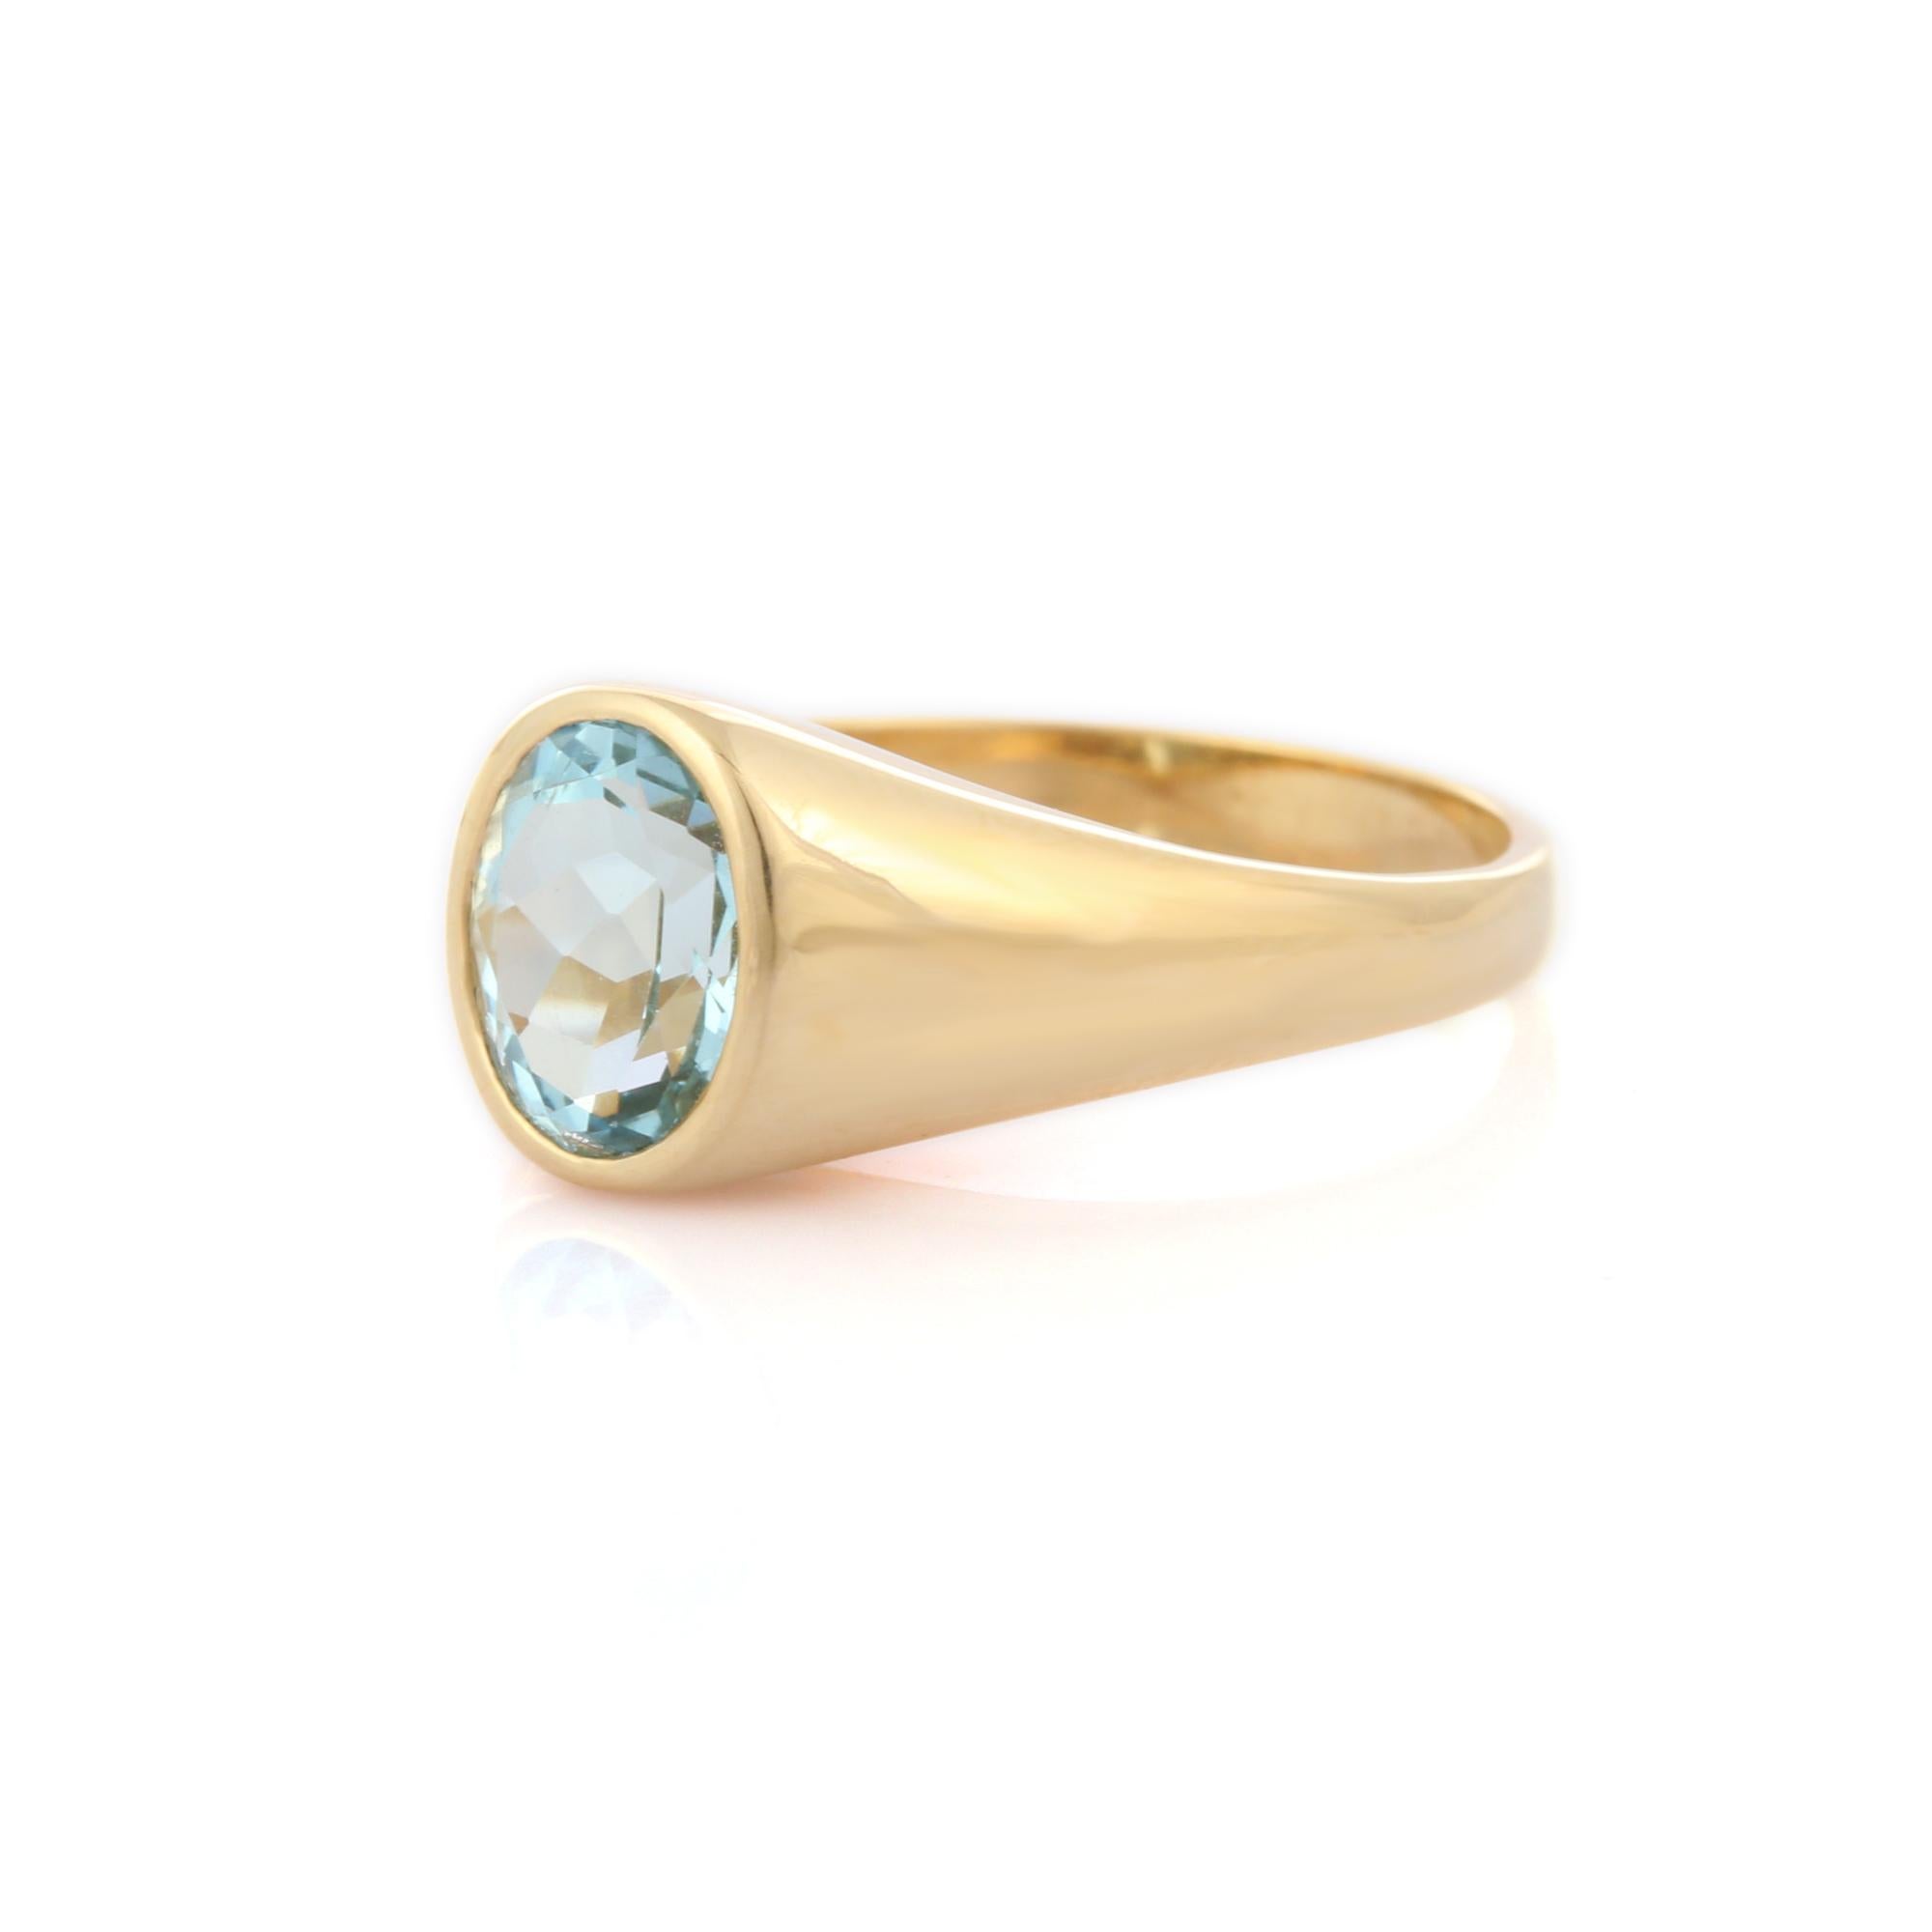 For Sale:  14K Yellow Gold 1.62 Carat Oval Cut Aquamarine Engagement Ring 3